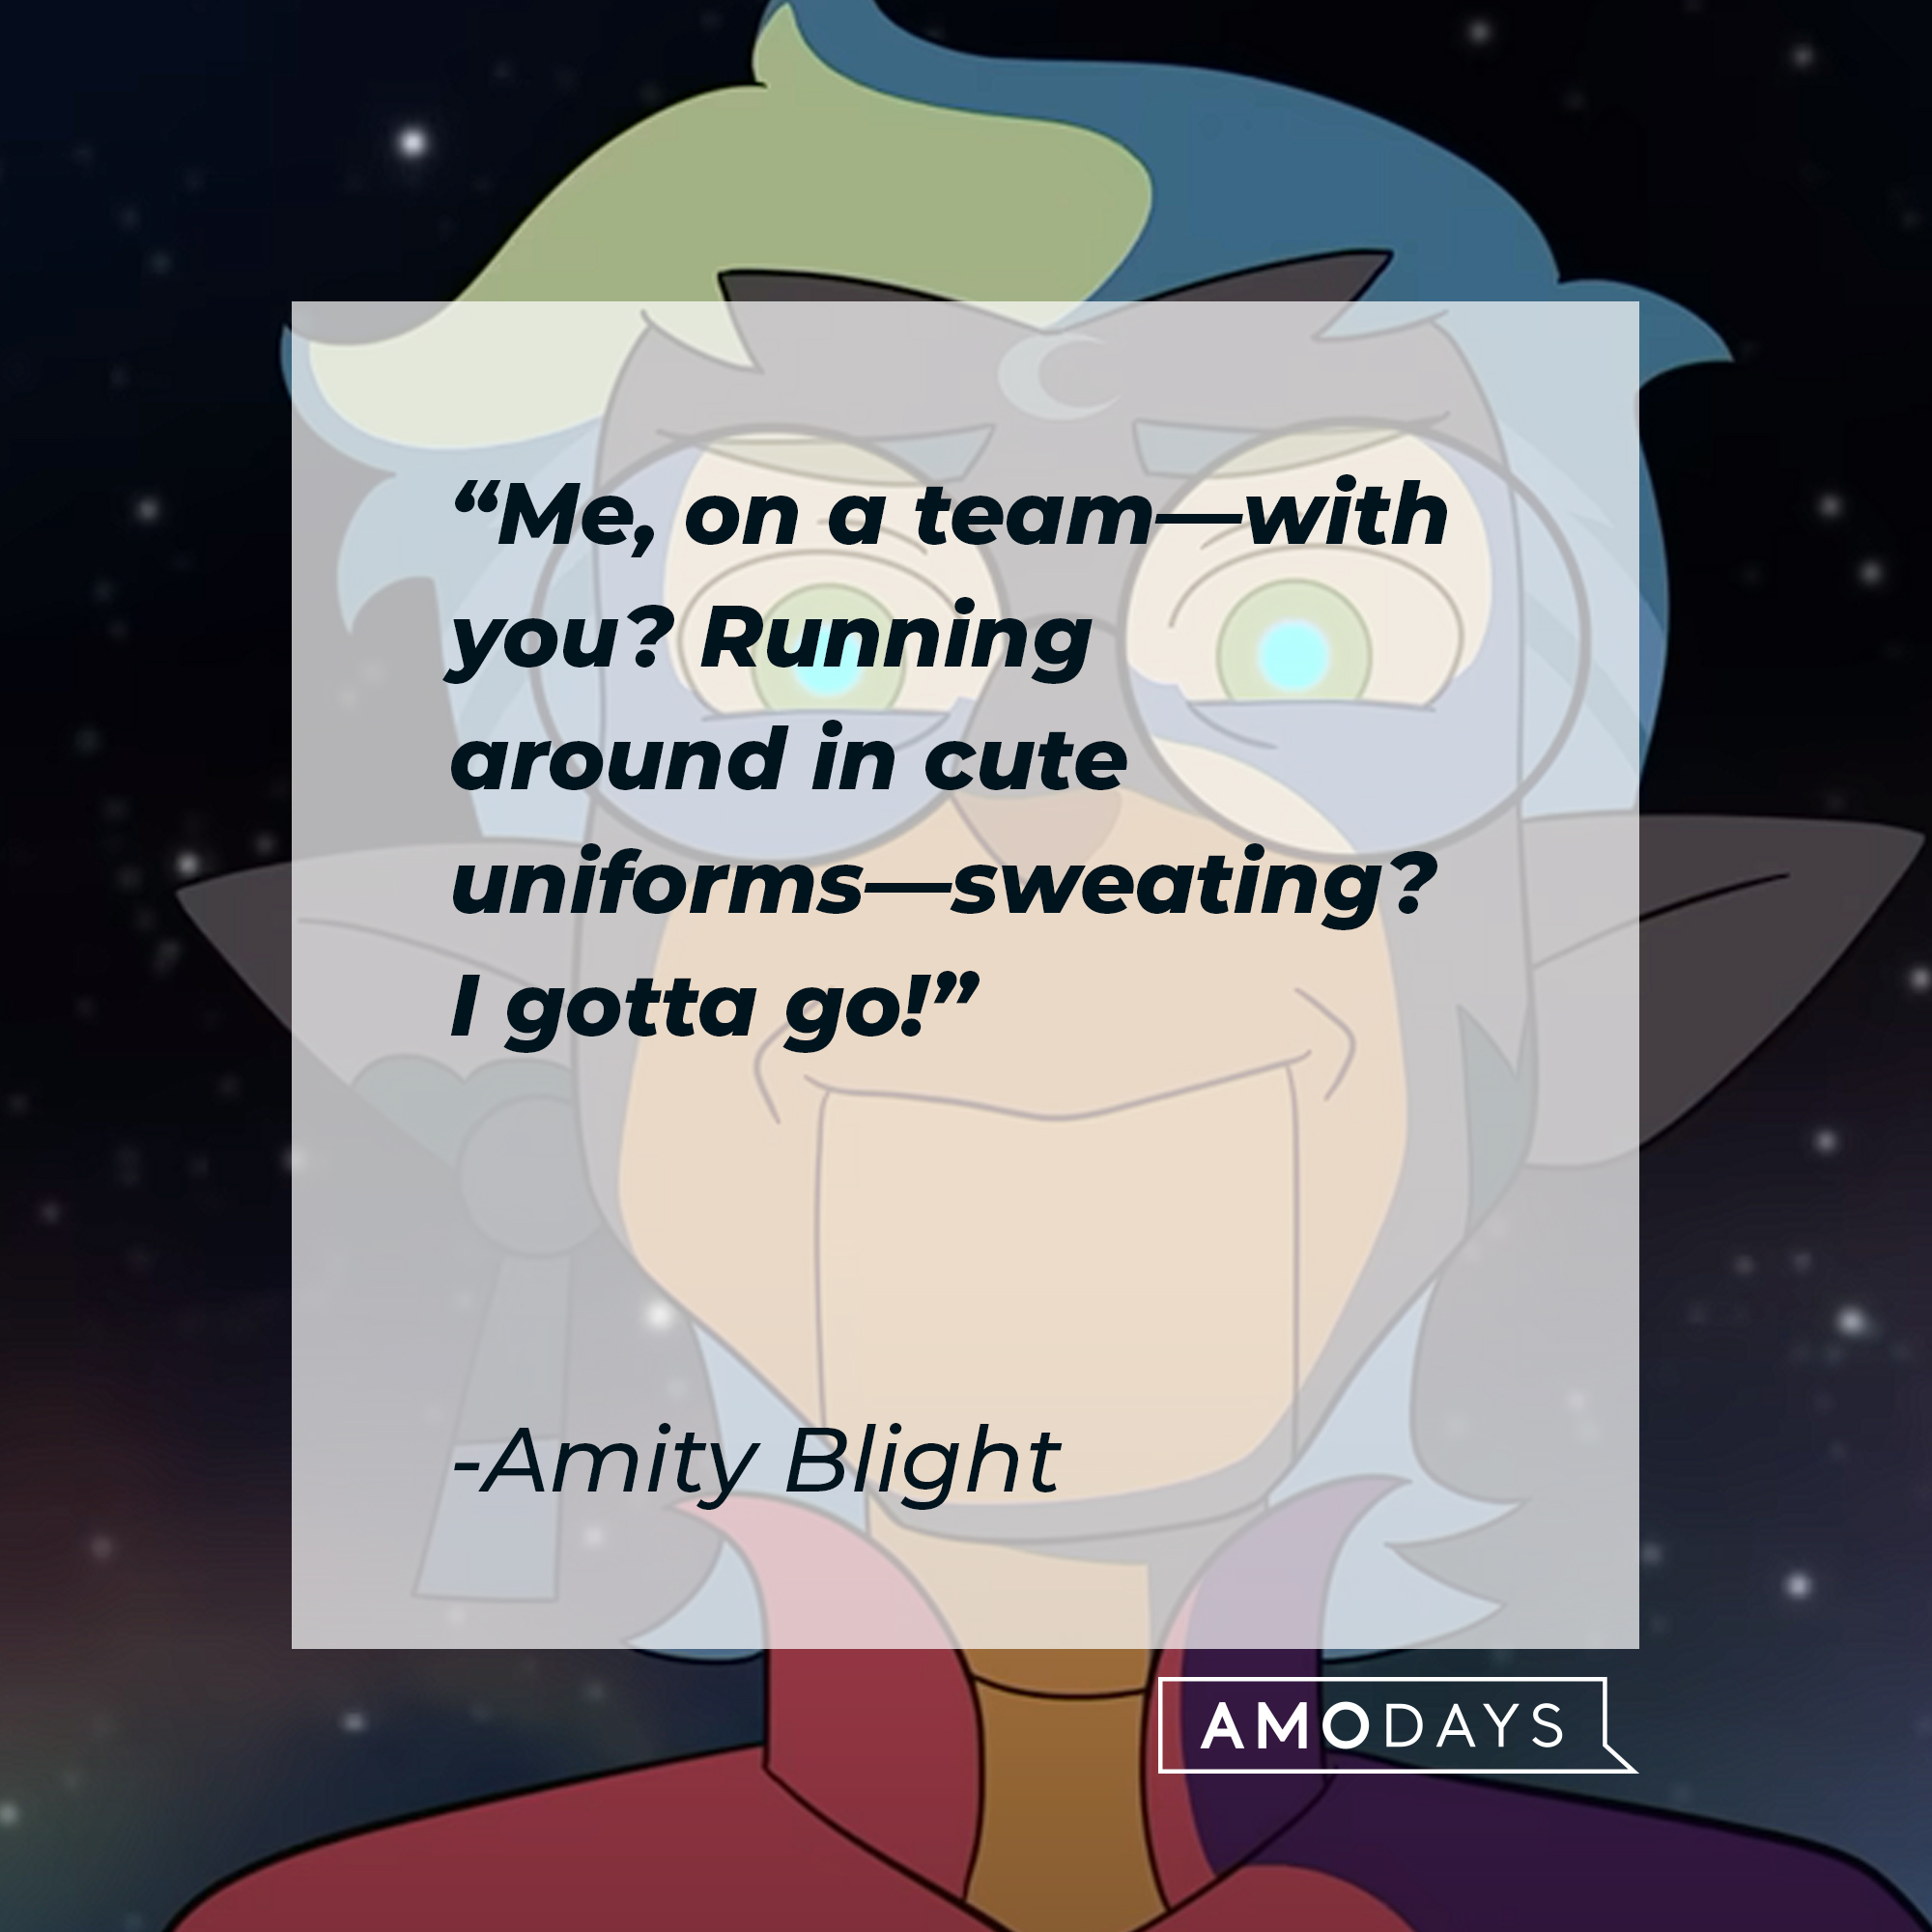 Amity Blight's quote: “Me, on a team—with you? Running around in cute uniforms—sweating? I gotta go!” | Source: youtube.com/disneychannel